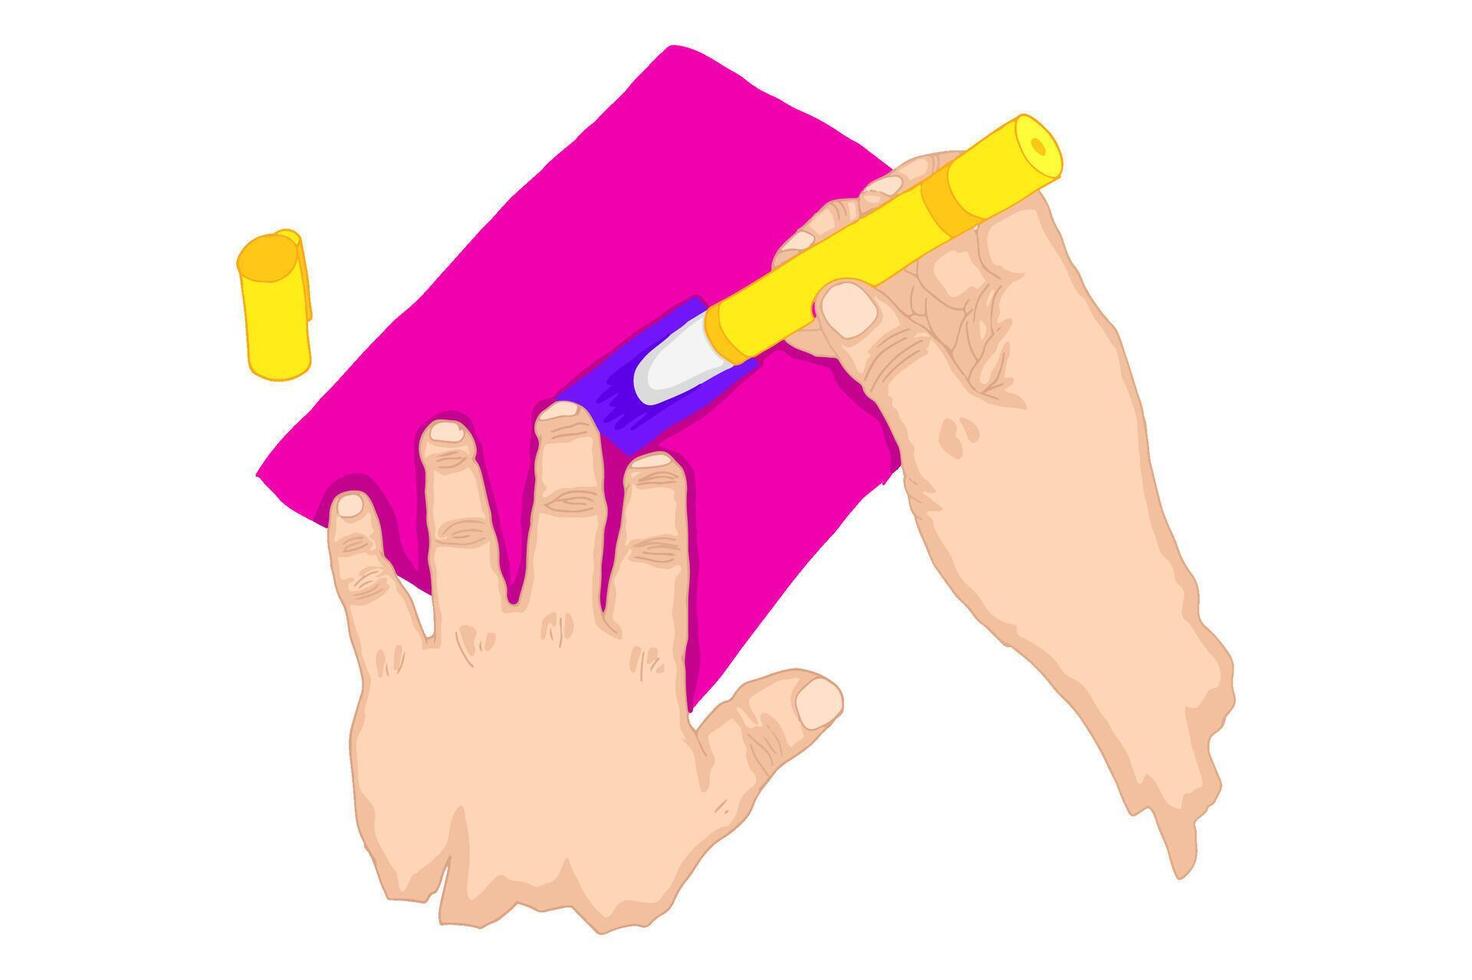 Vector Image of Hands Making Crafts